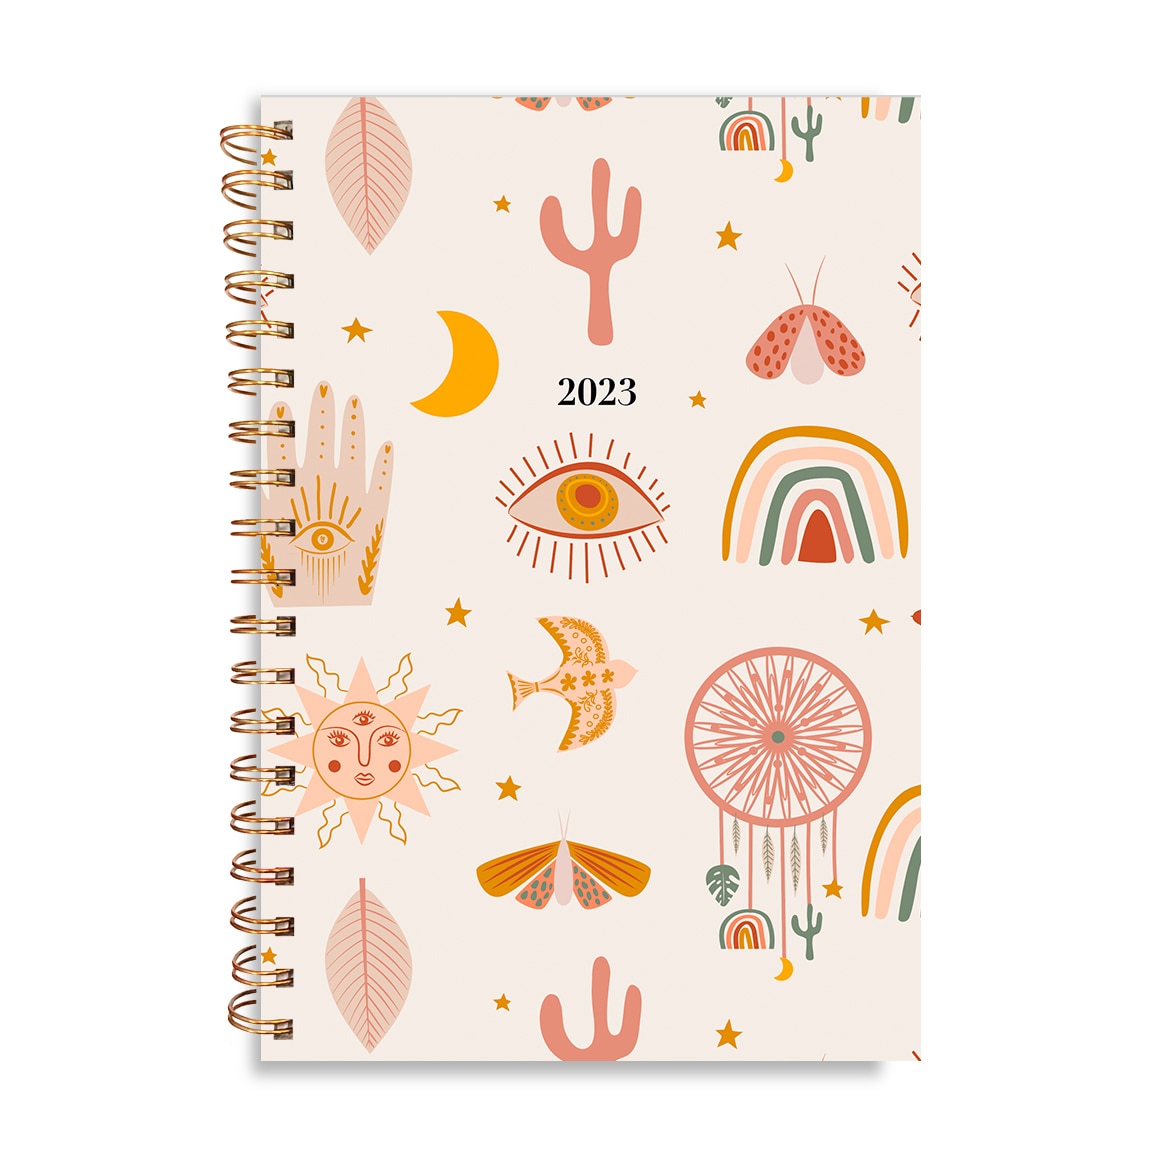 2022 - 2023 Large Delux Boho Planner,  Paper cover twin-ring spiral planner with mylar tab dividers